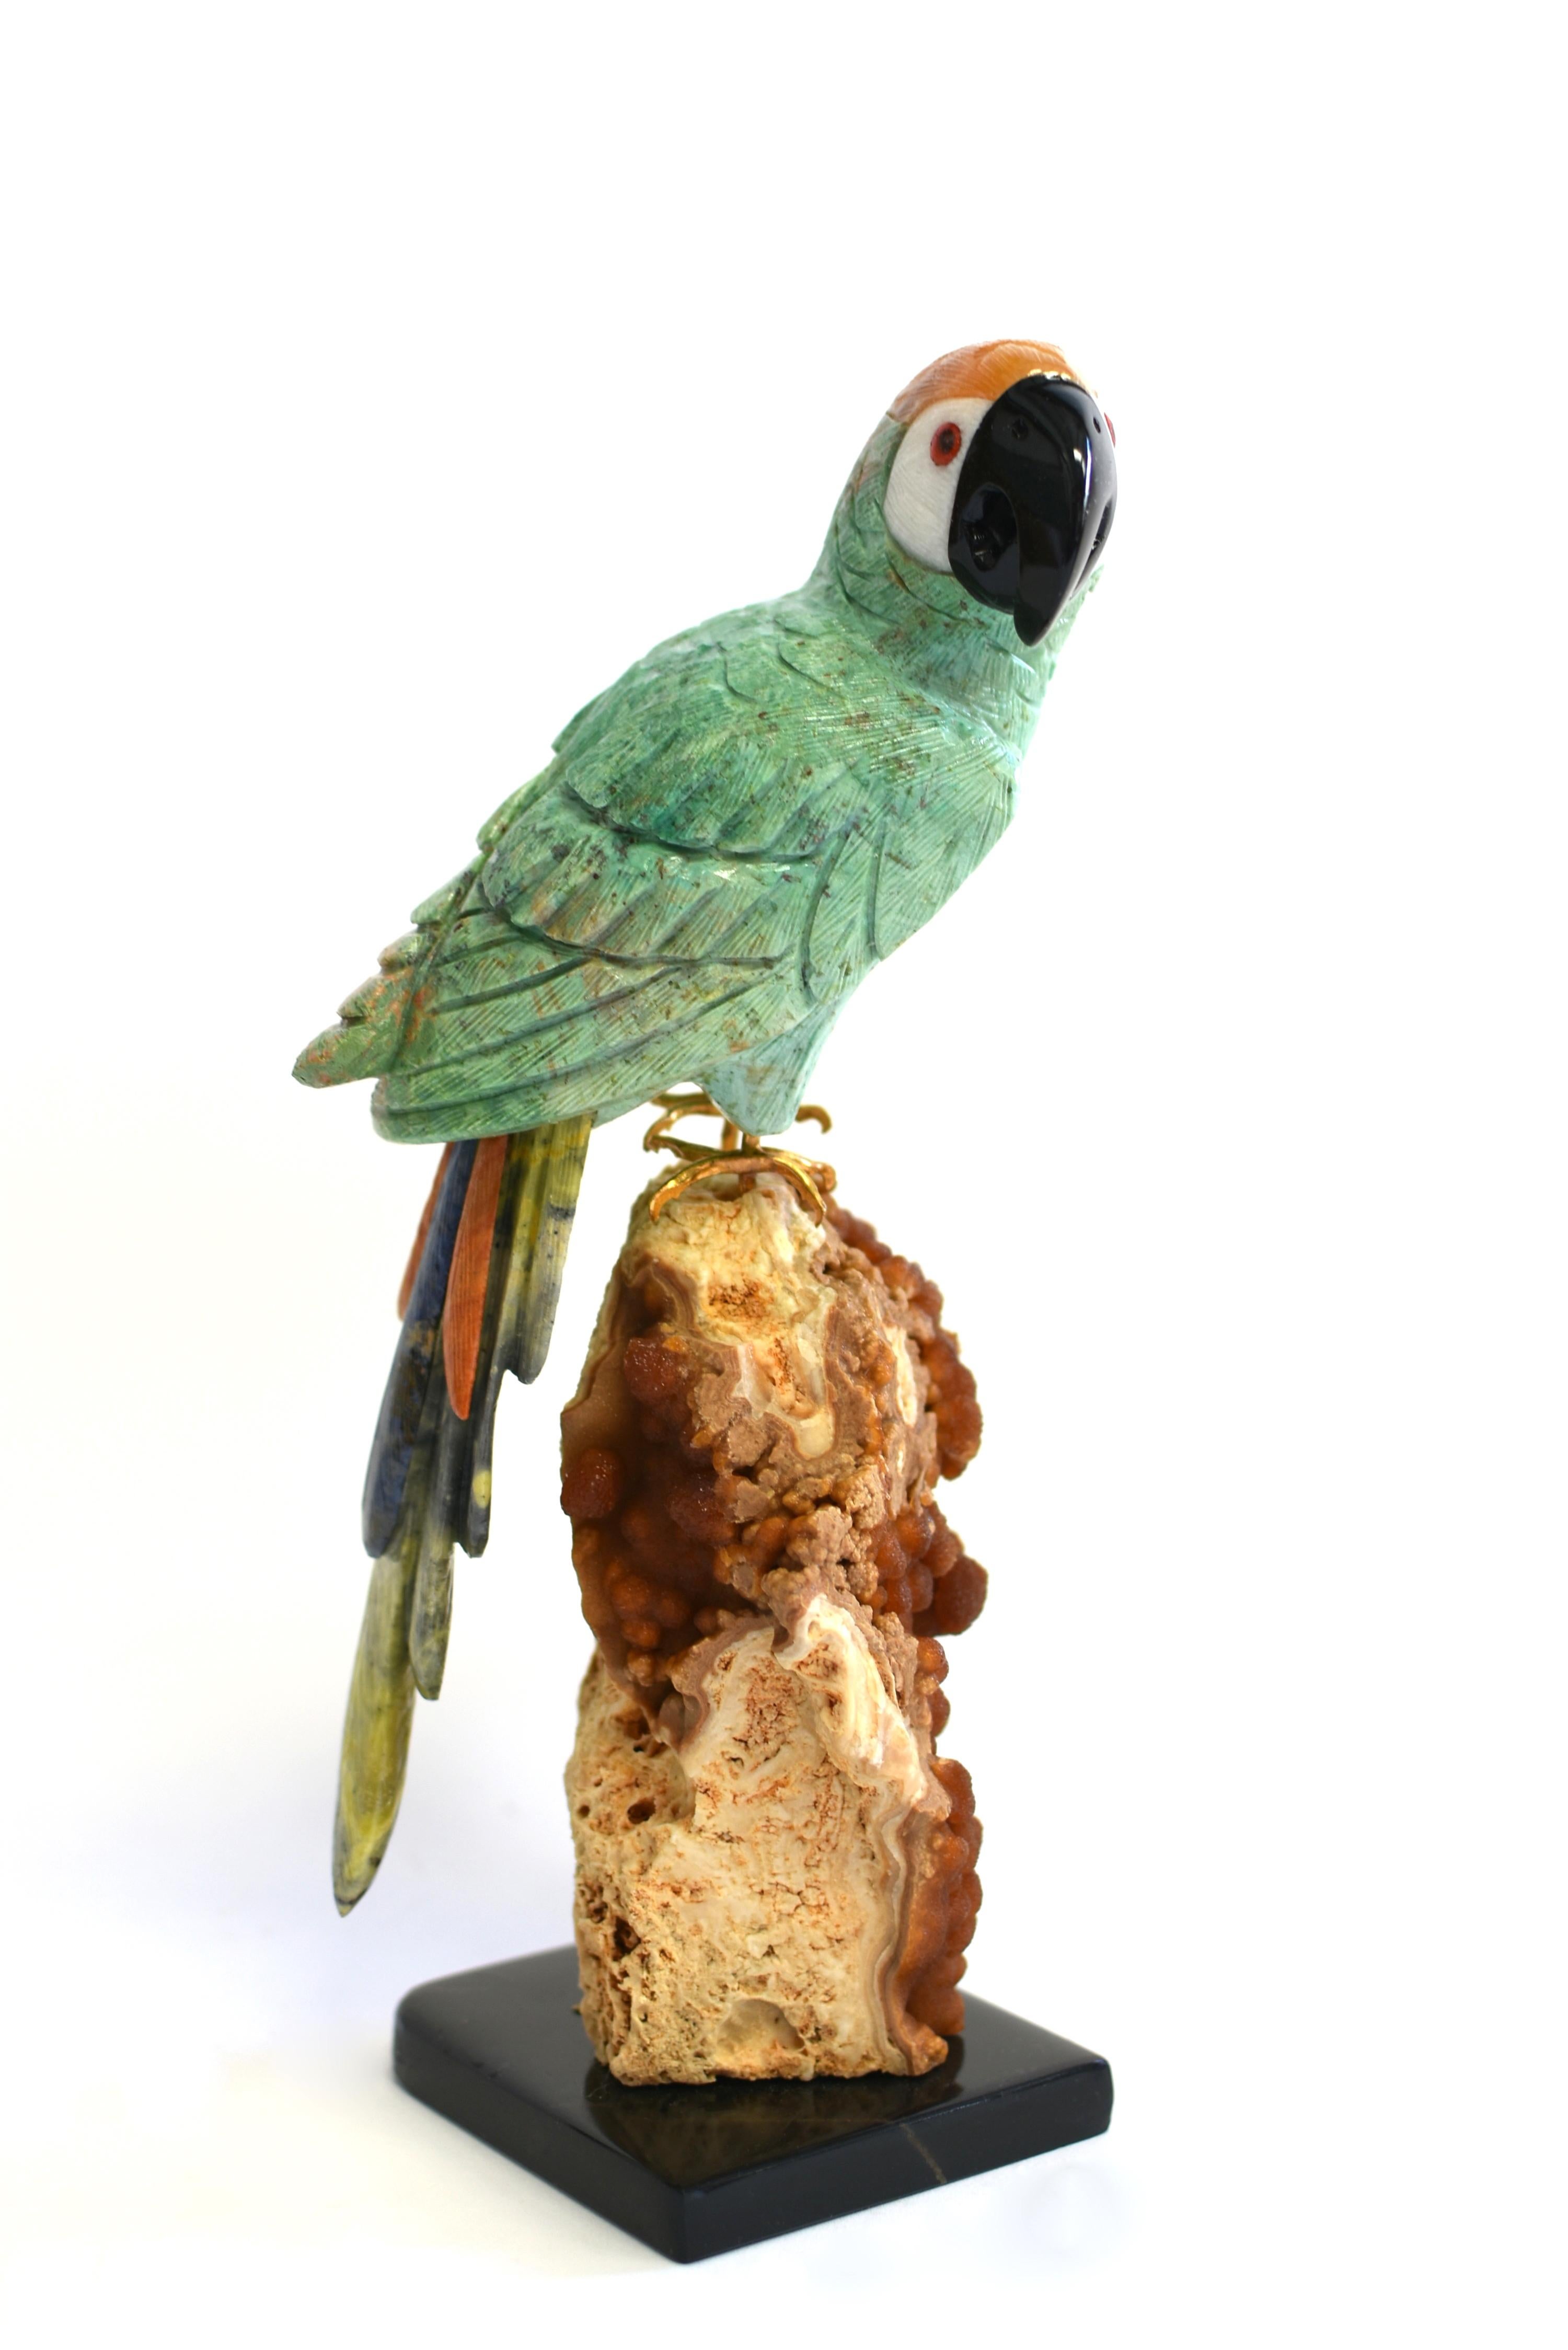 A beautiful gemstone Parrot on red jasper cluster on black marble base. Perched on jasper cluster, the parrot with turquoise amazonite plumage and tail in navy sodalite, orange jasper and green serpentine, the crown in agate and beak in black onyx.